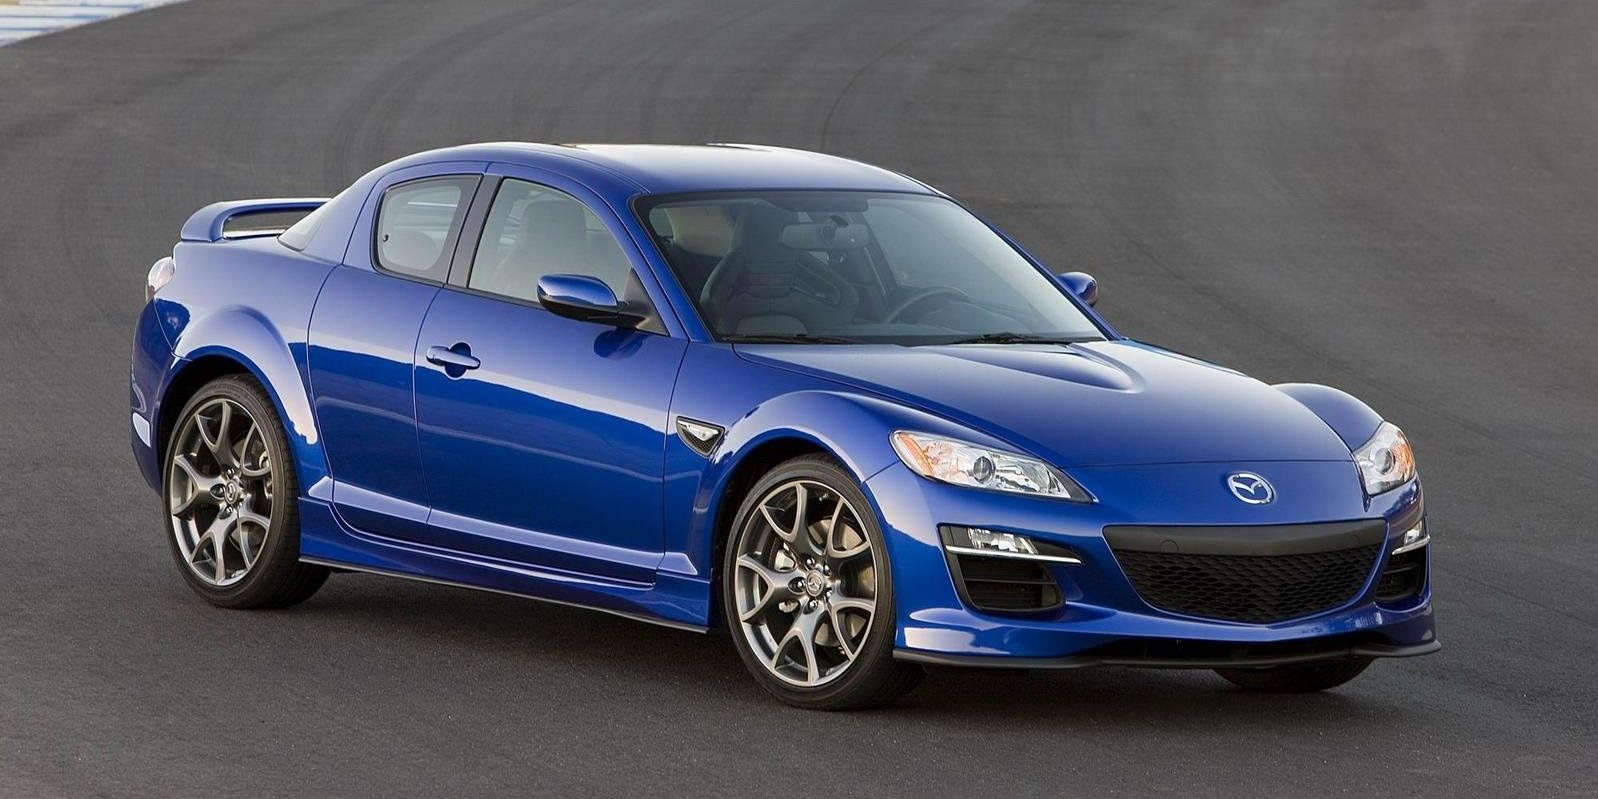 Mazda RX-8 (Blue) parked on the road - Front Top Angle